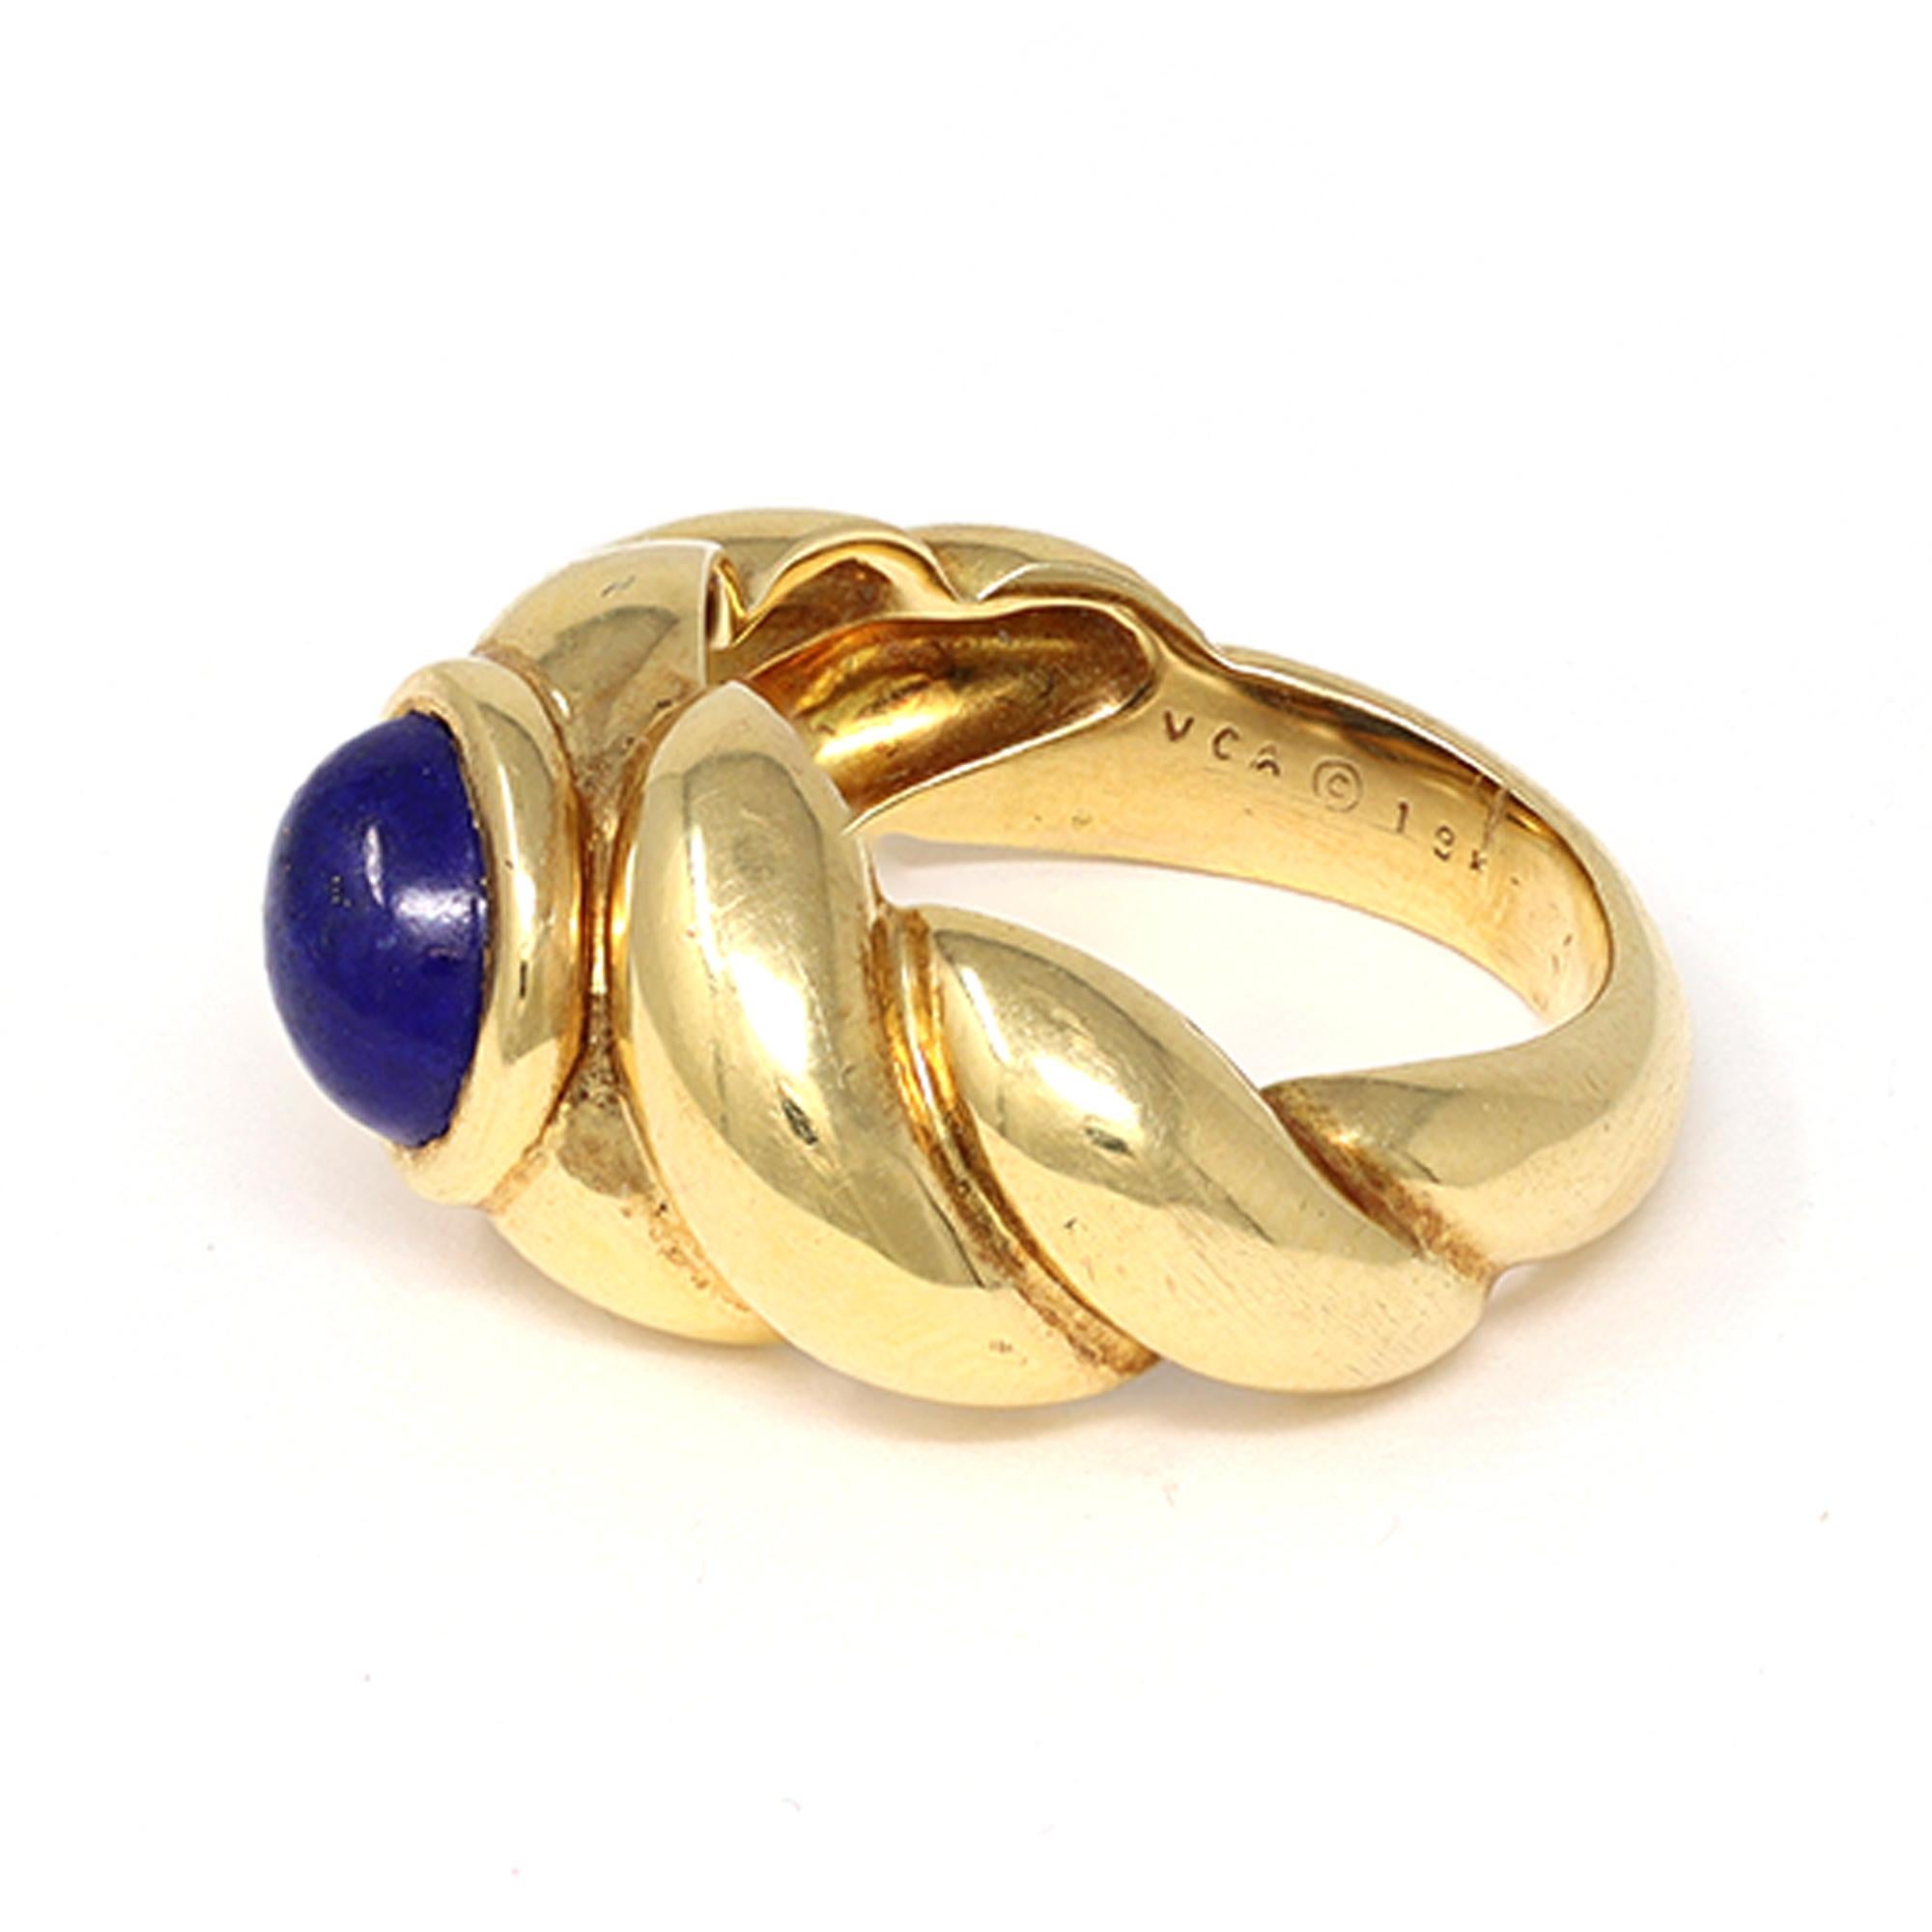 Modern Van Cleef & Arpels Lapis Lazuli Cabochon Ring Set in 18k Yellow Gold For Sale